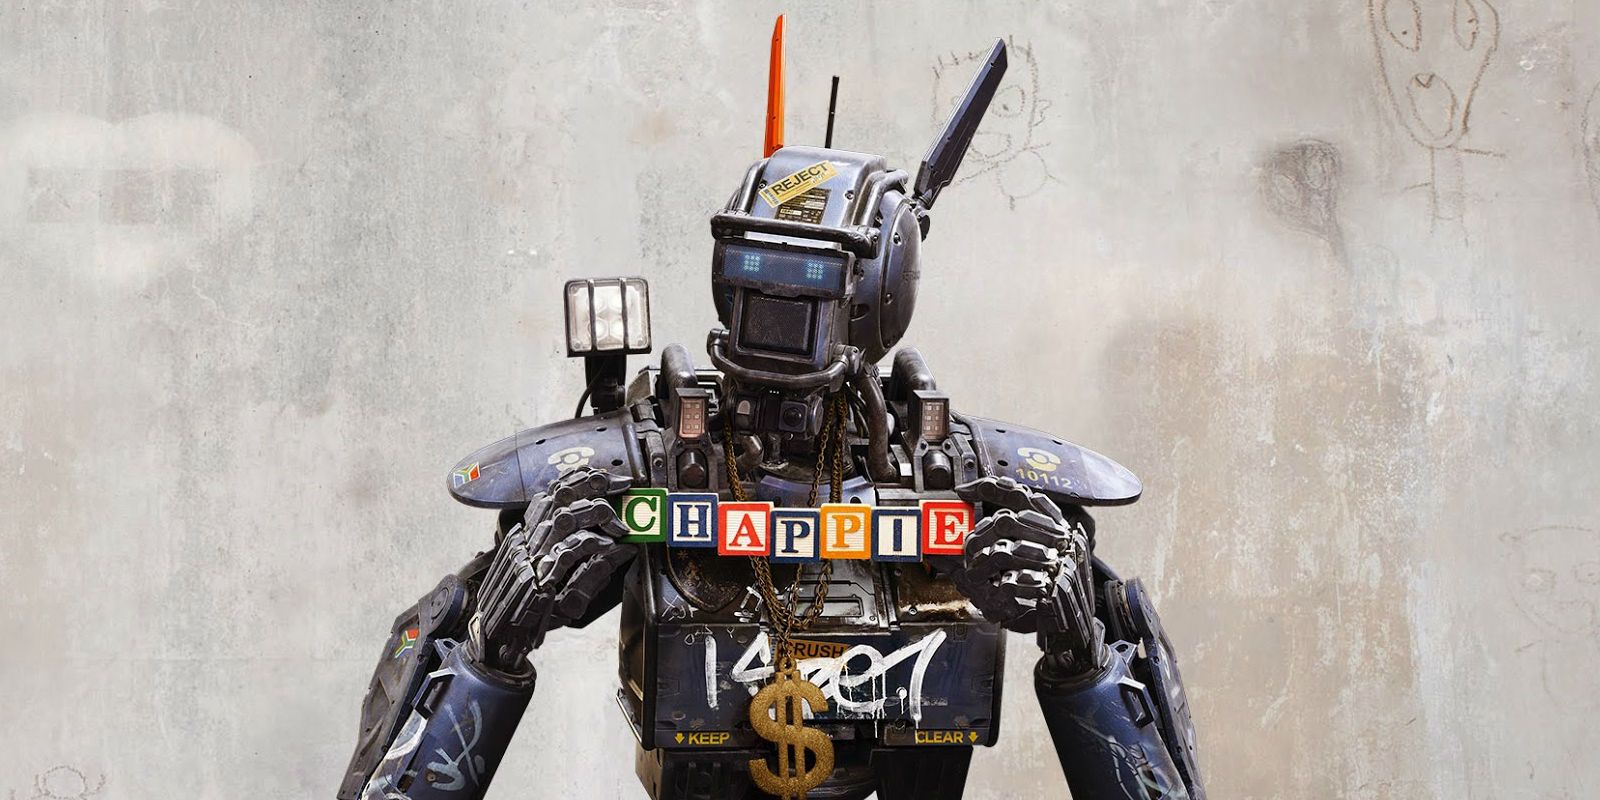 Chappie Director Says Audiences Rejecting The Movie Is Problematic